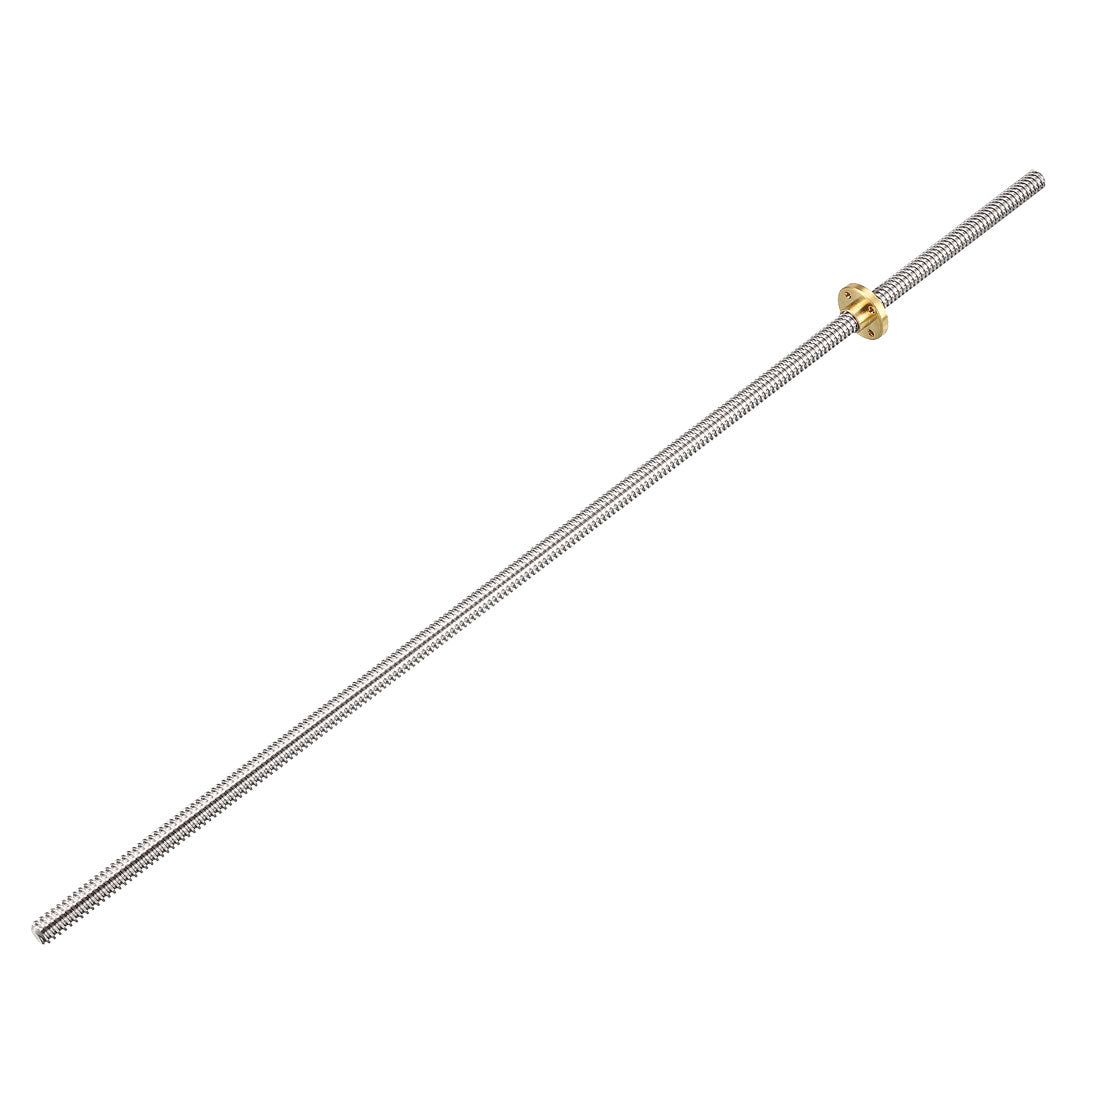 uxcell Uxcell 550mm T8 Pitch 2mm Lead 8mm Lead Screw Rod with Copper Nut for 3D Printer